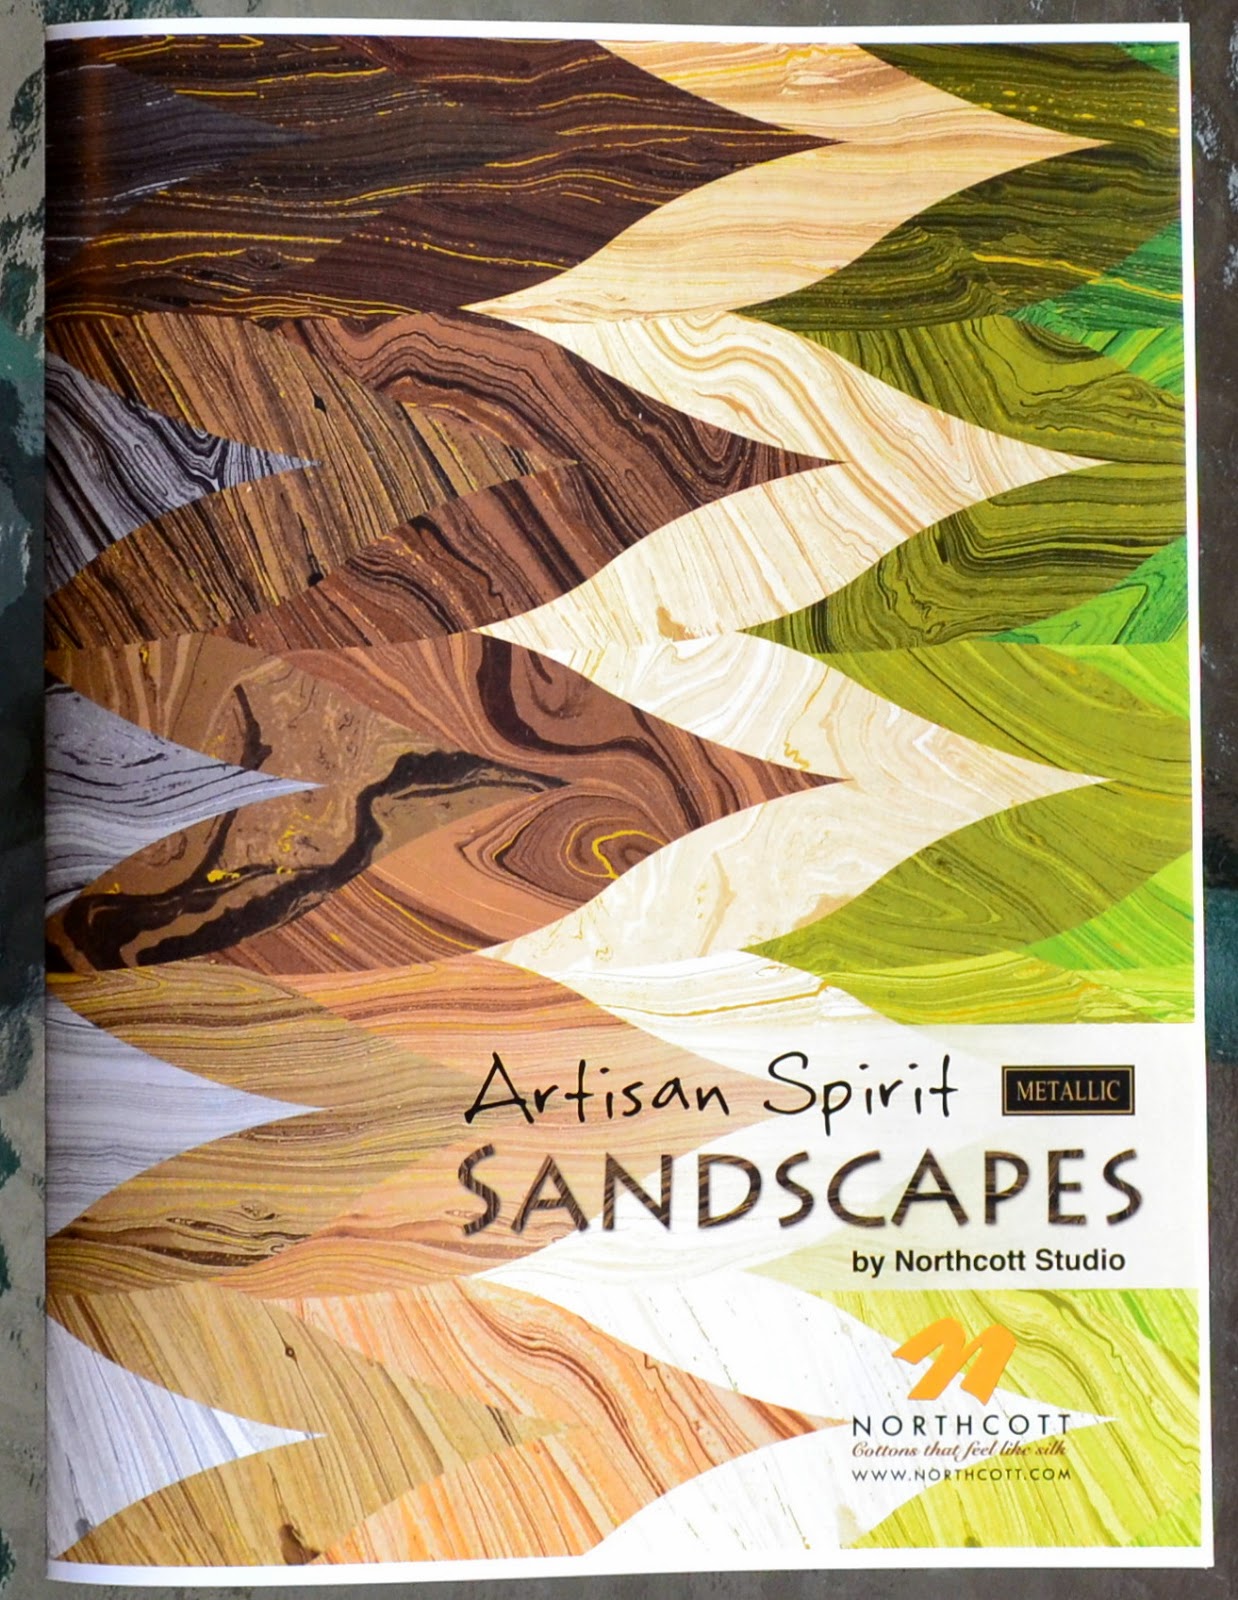 http://www.northcott.net/?keyword=sandscapes&filterlist=0&searchurl=%3Fsid%3D2%26layout%3D1col%26content%3Dsearch&x=0&y=0